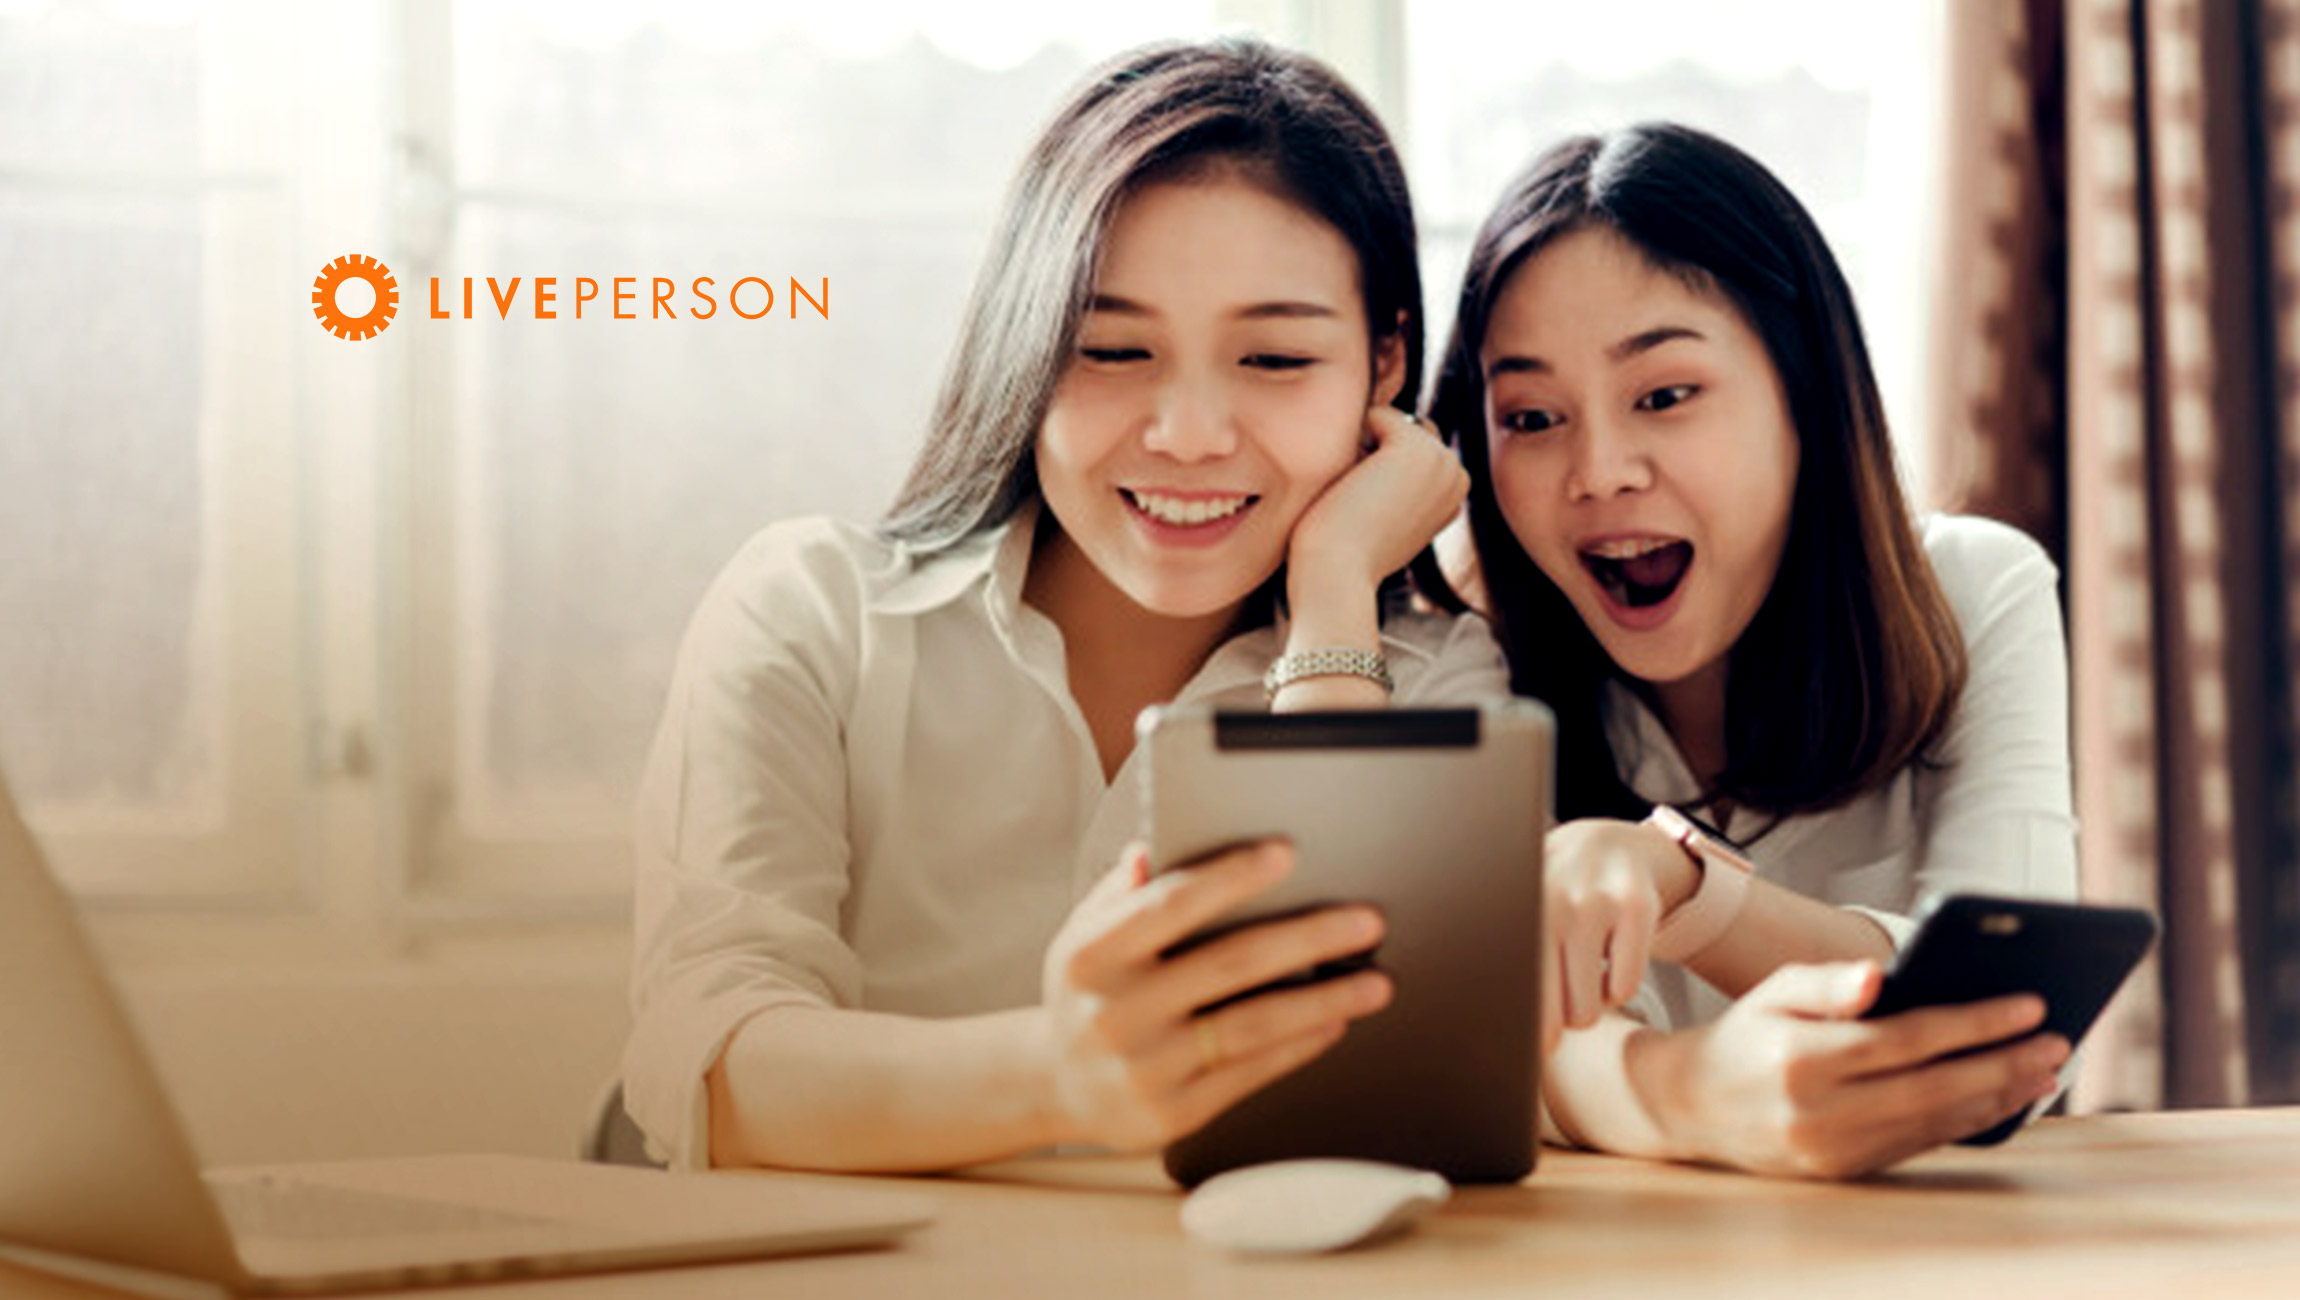 LivePerson announces executive hires to further accelerate Conversational AI growth, scale, and partnerships